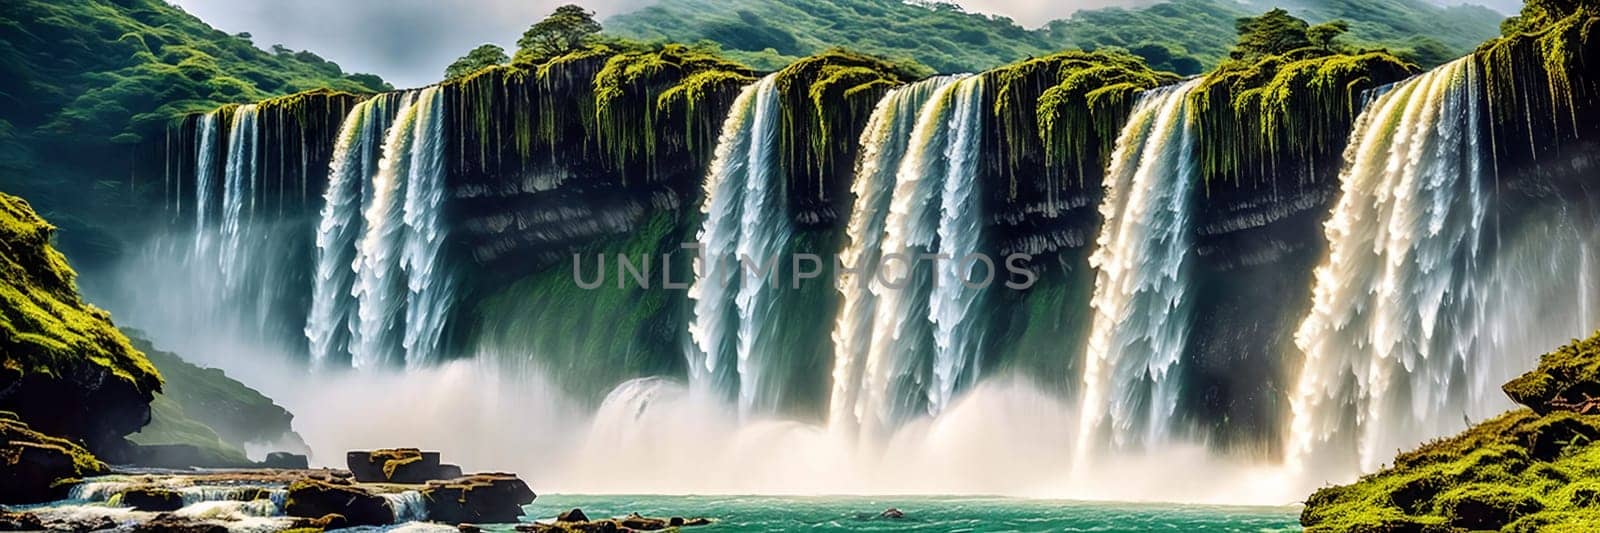 Witness a majestic waterfall plunging down a rocky cliff, displaying the raw power and beauty of nature in a mesmerizing capture